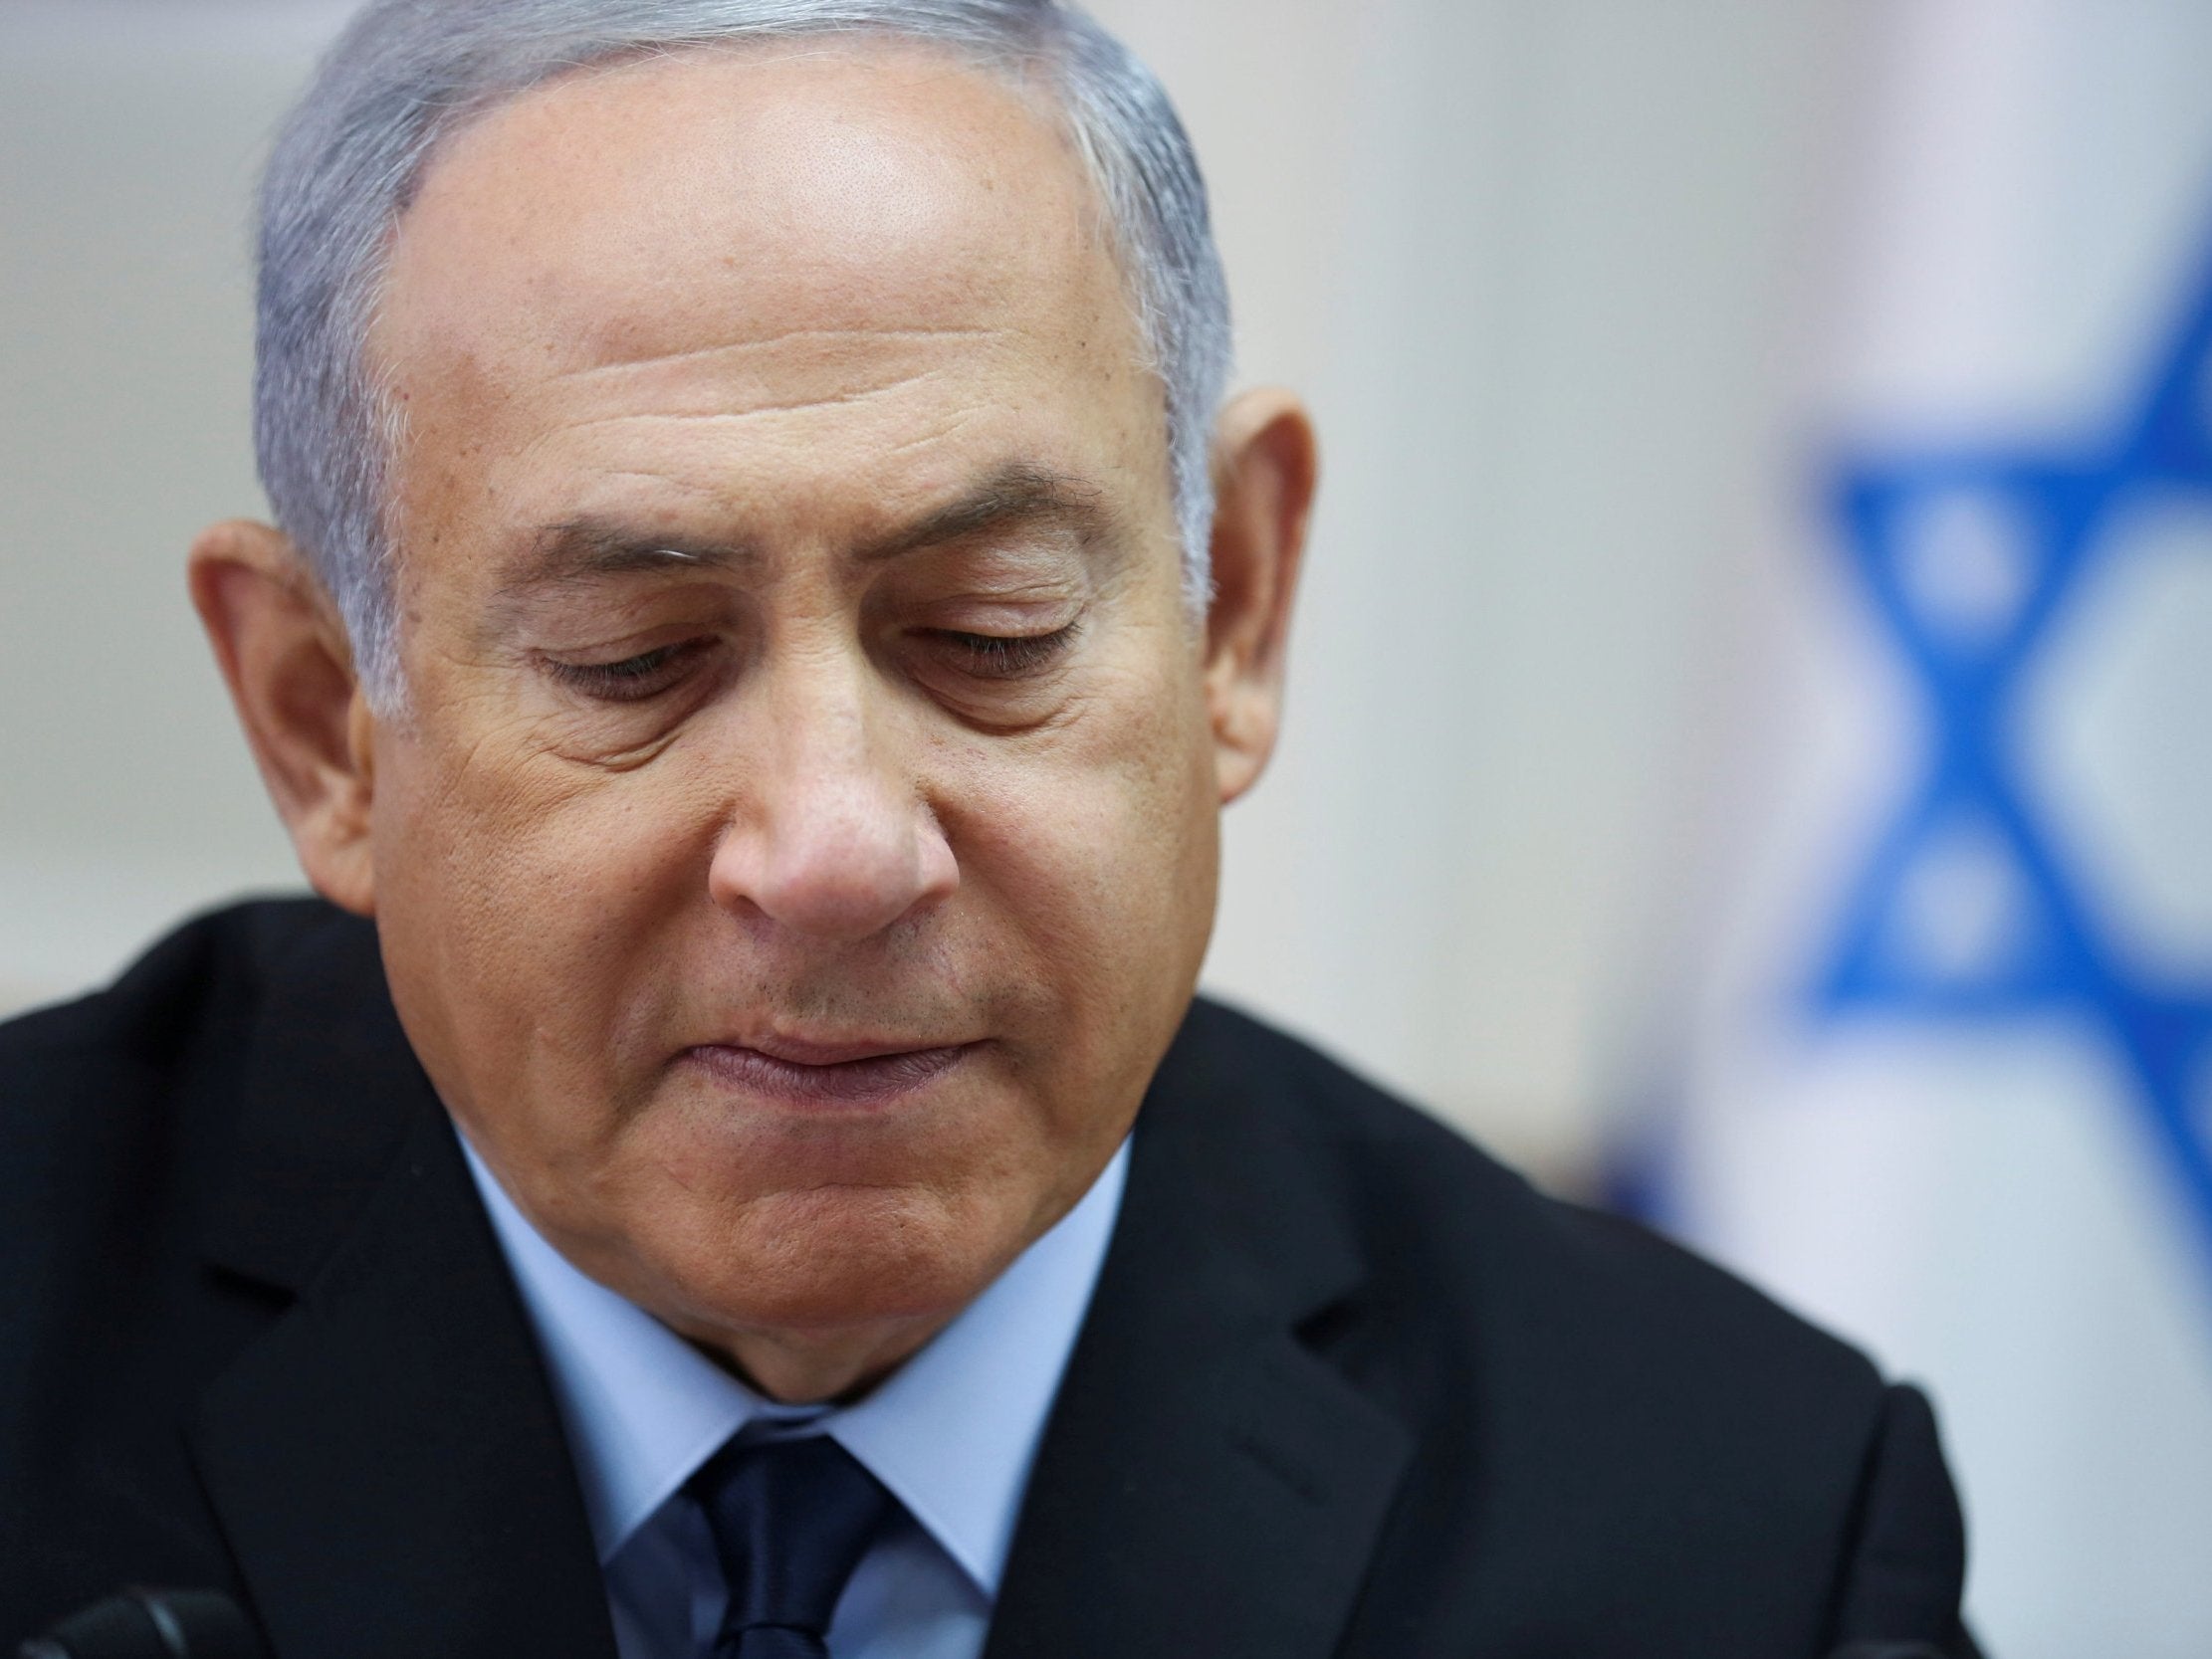 Israel prime minister Benjamin Netanyahu's coalition appears to be shakier than ever